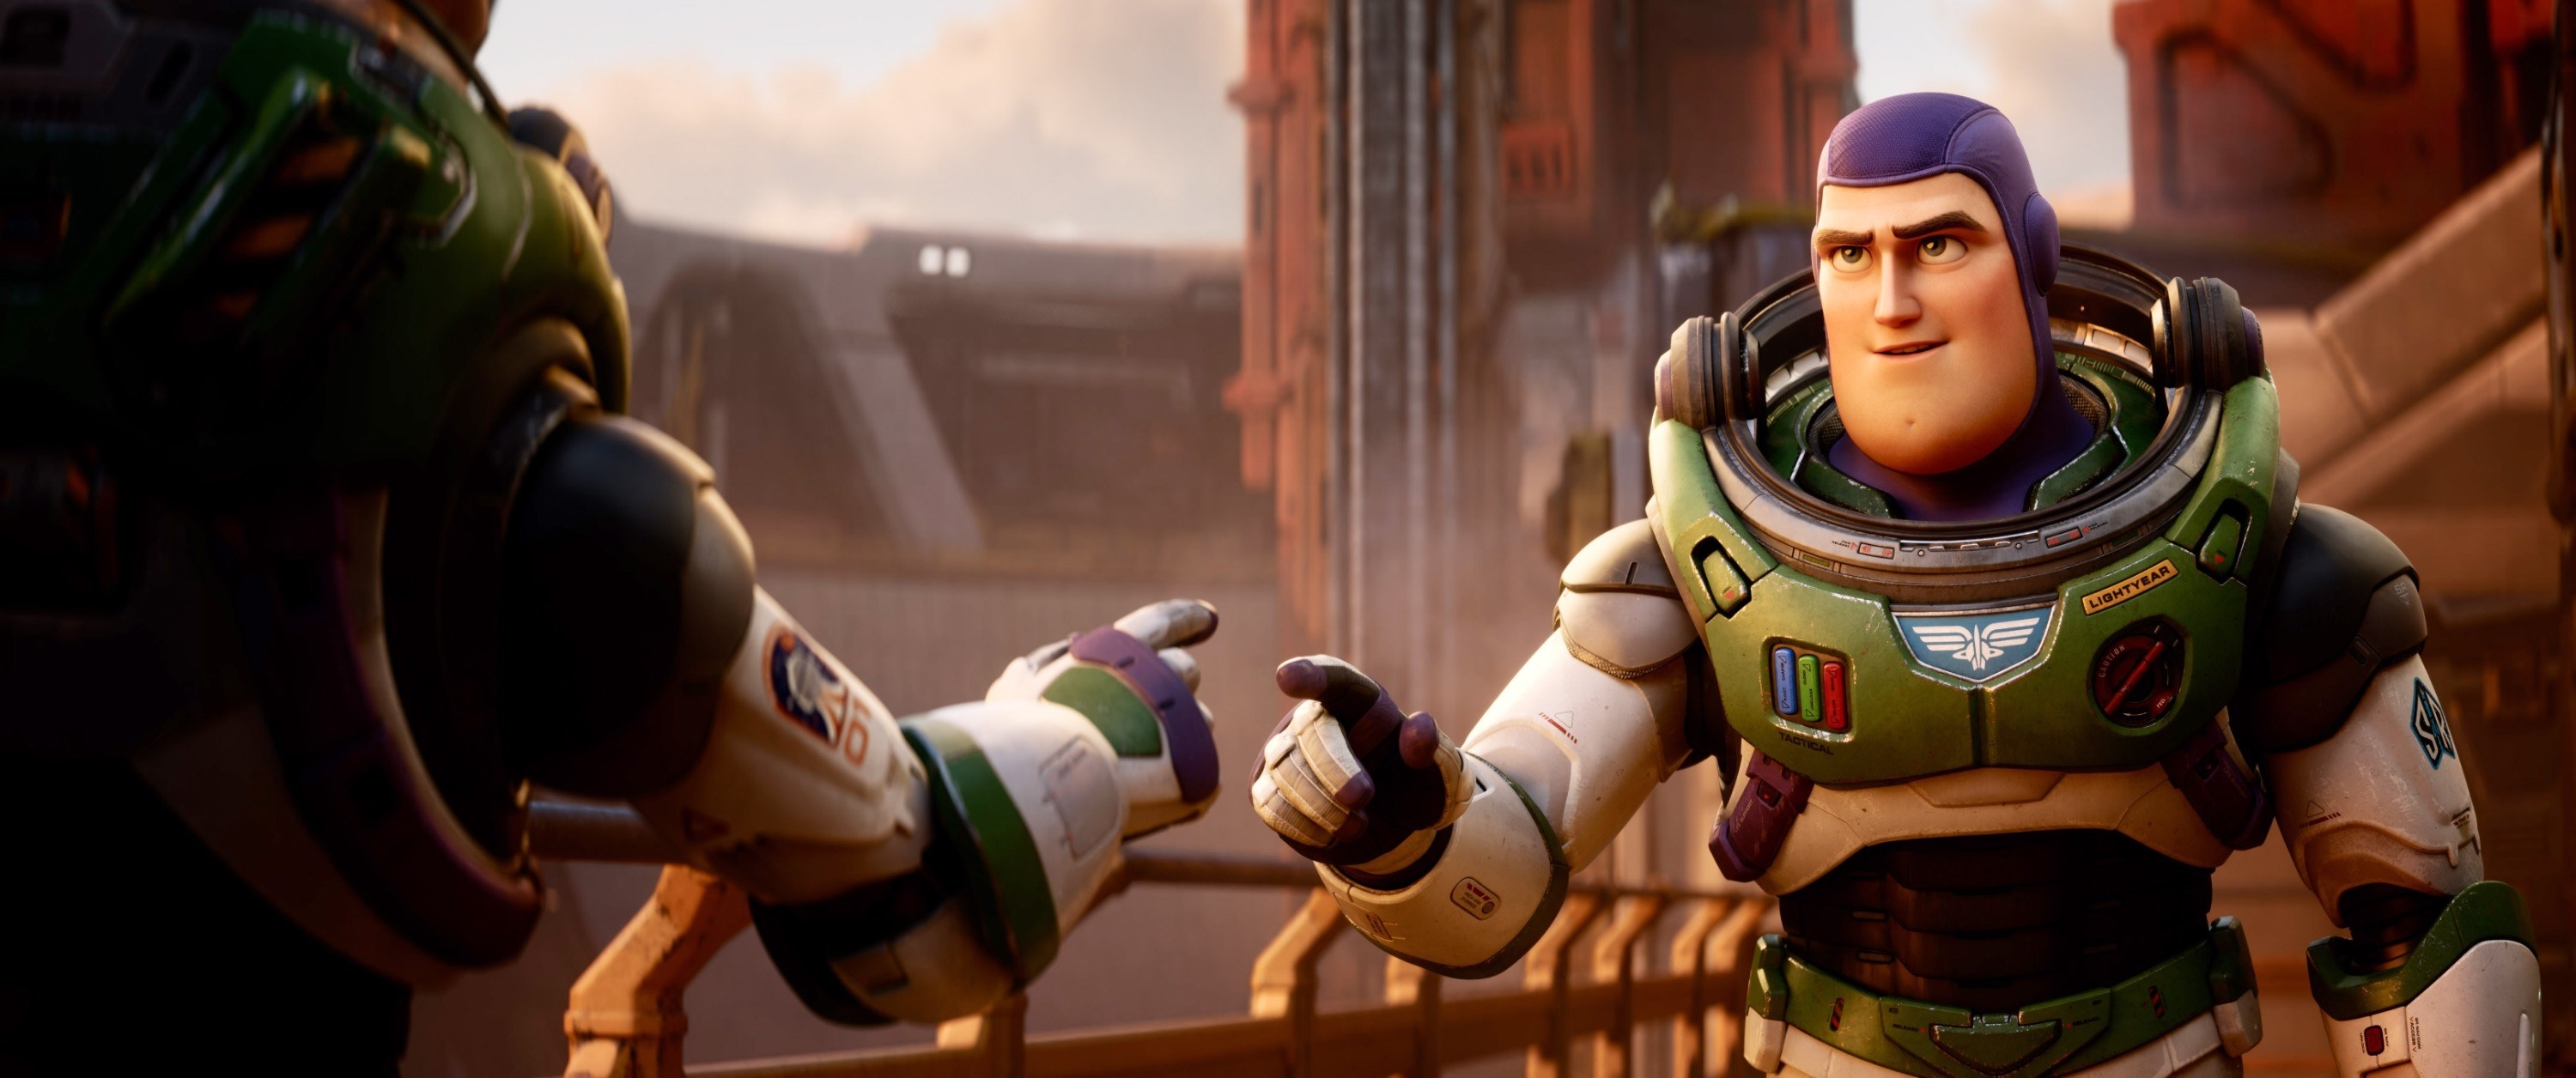 Buzz Lightyear in the new film, Lightyear; he has a more realistic animation style that prevents versions of Buzz